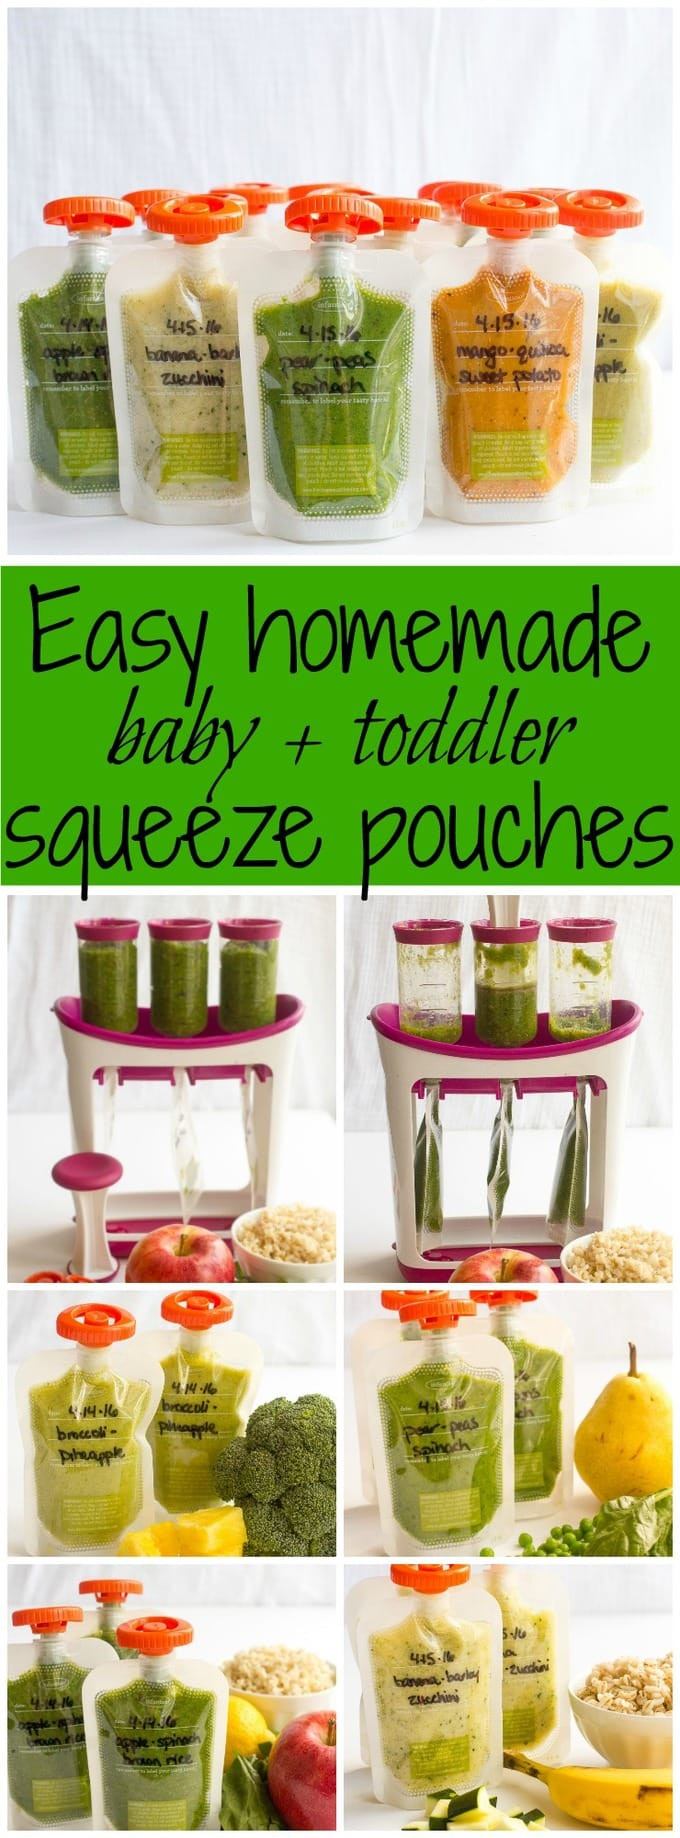 DIY Baby Food Pouches
 Homemade baby food pouches how to and 5 recipes Family